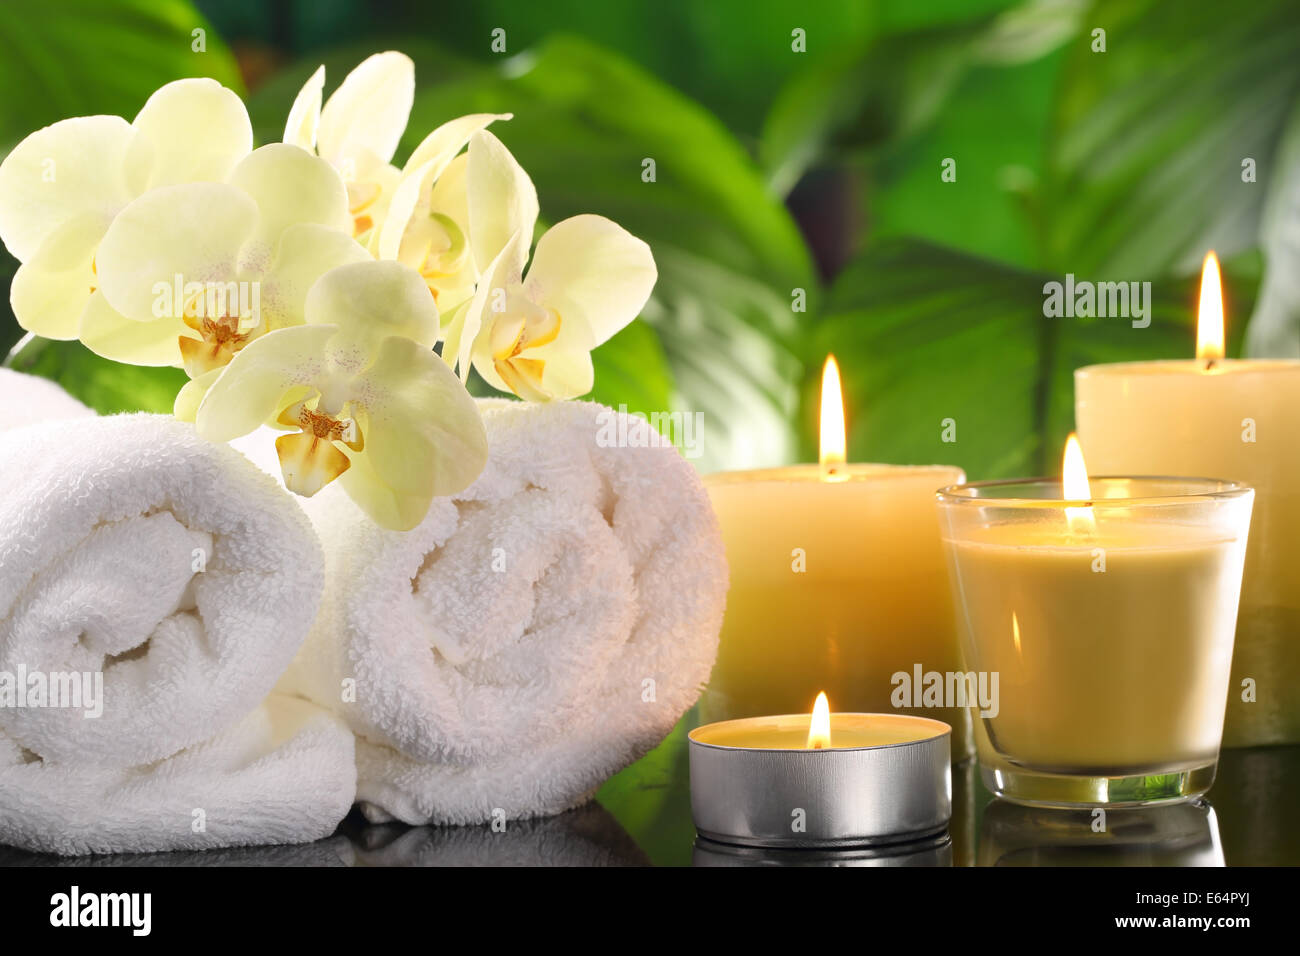 Spa still life with towel and burning candles. Stock Photo